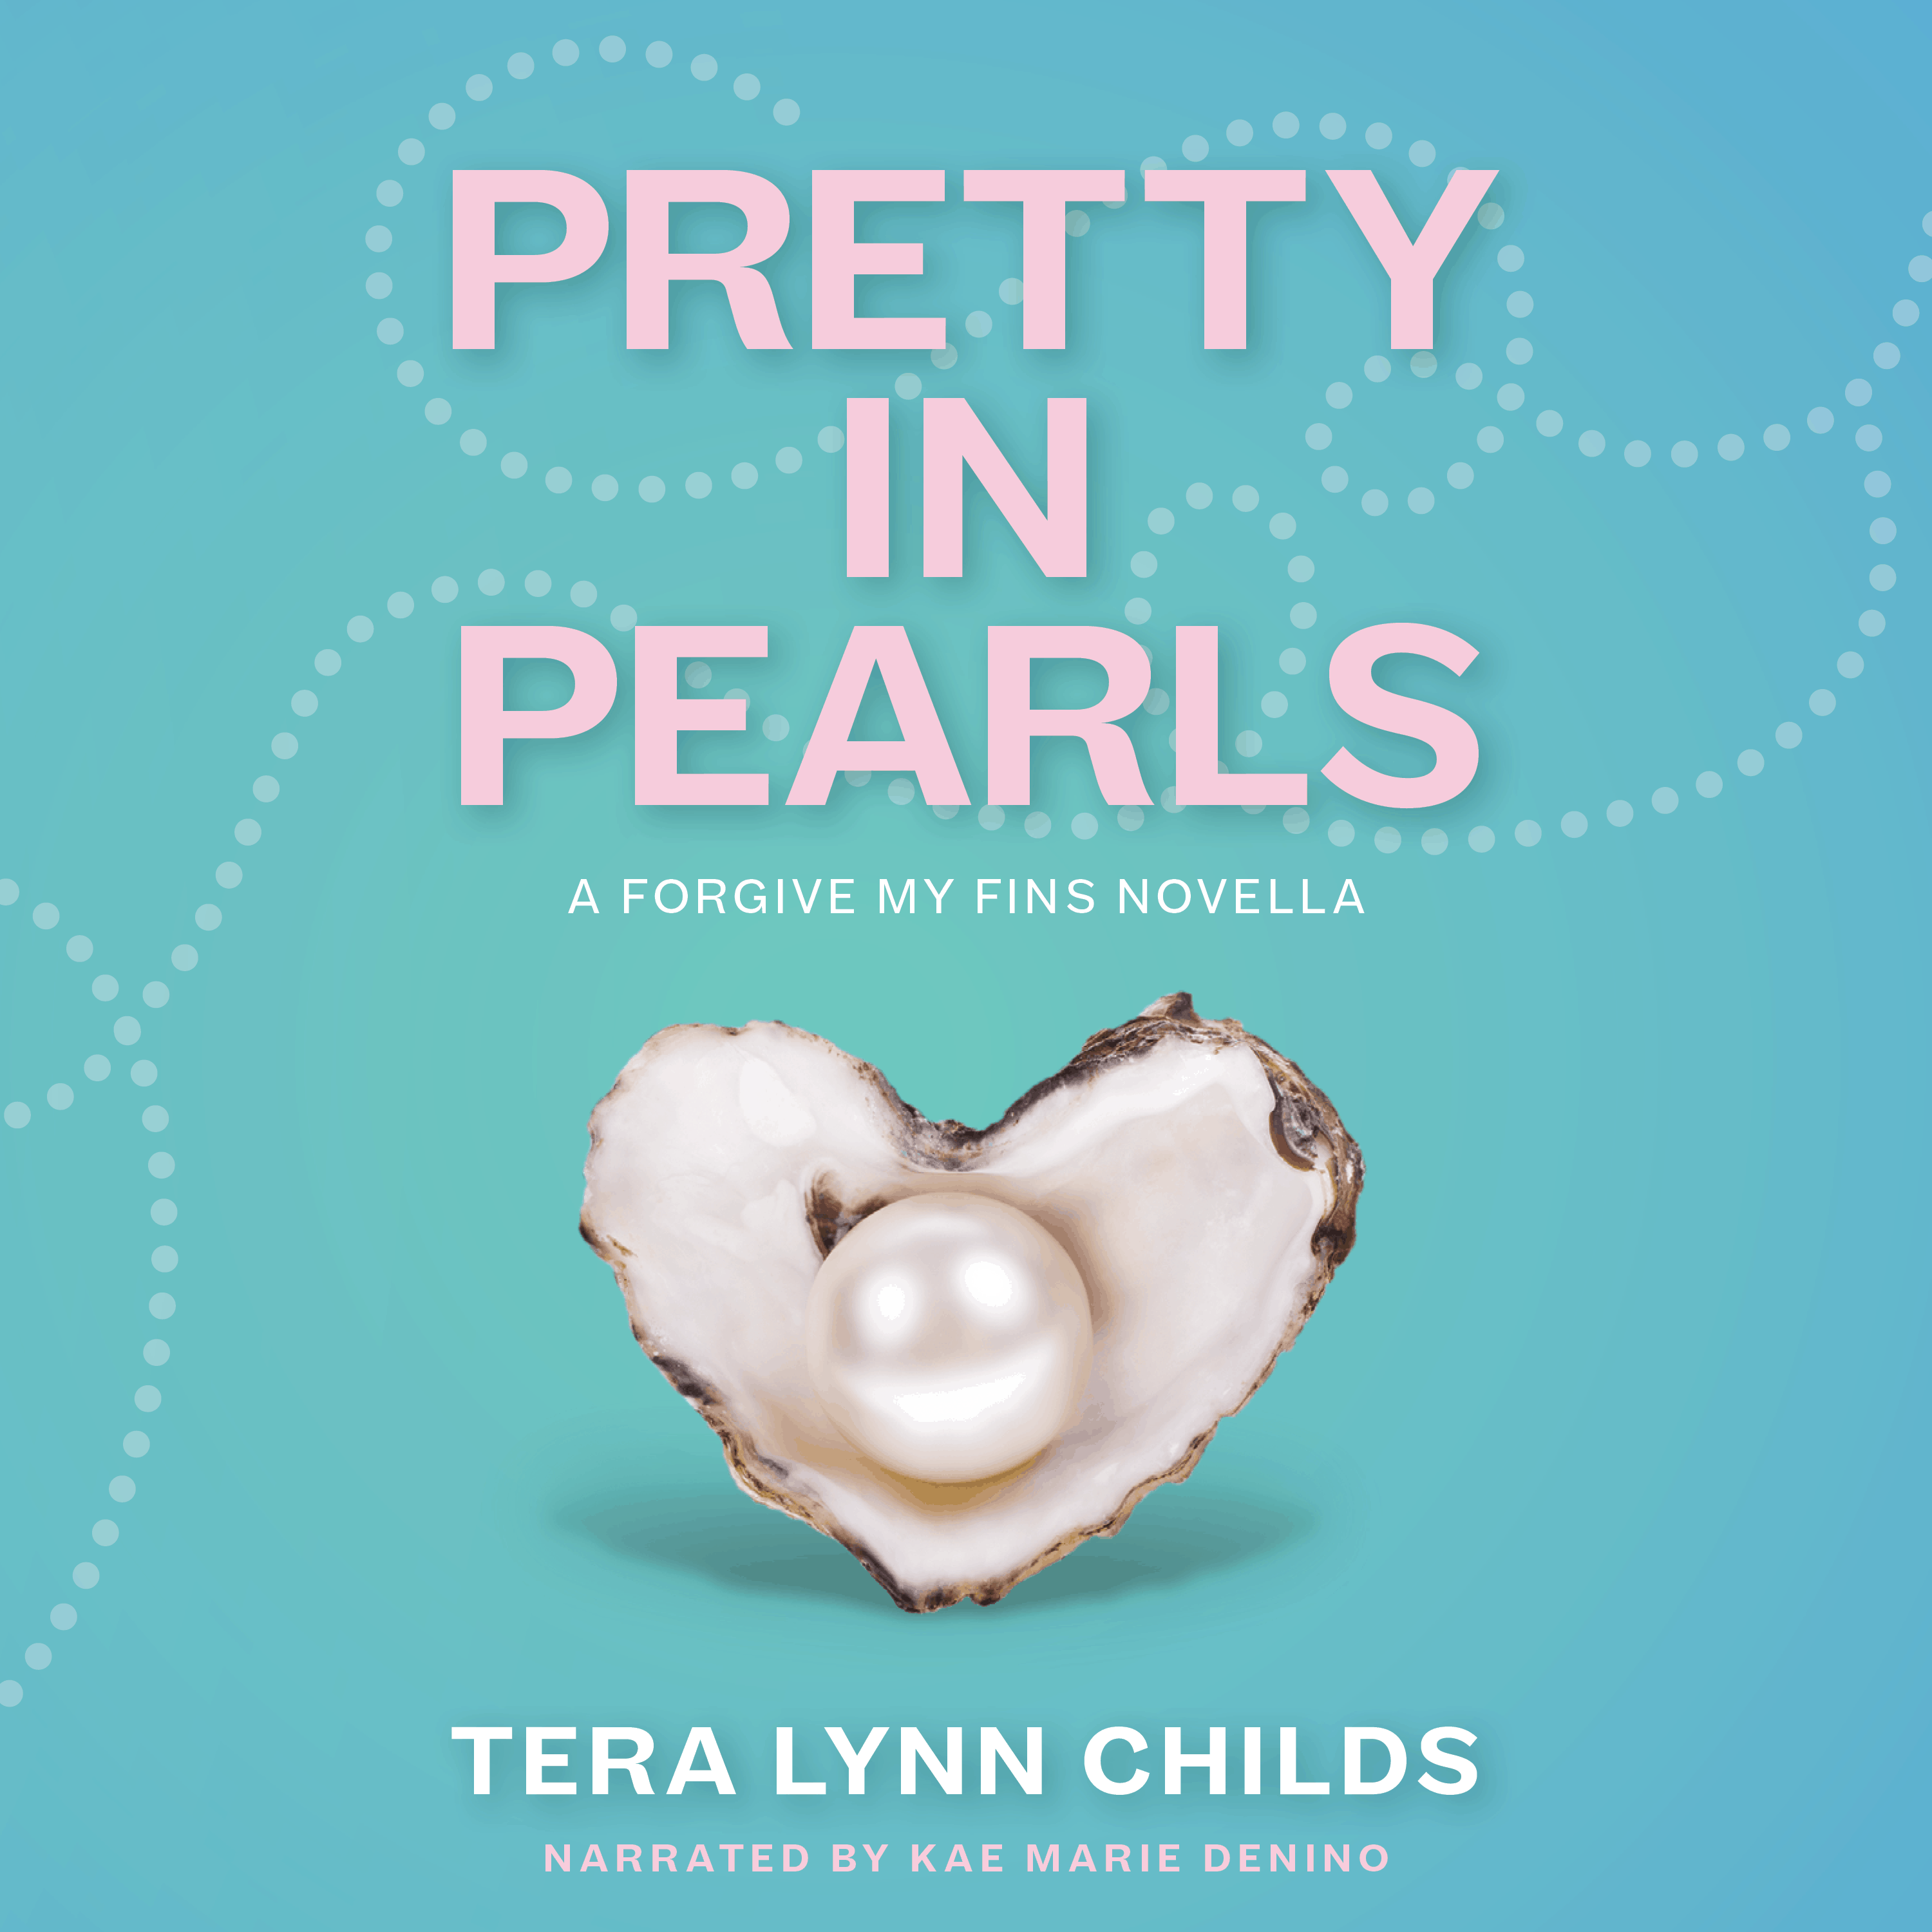 Audiobook cover of Pretty in Pearls.